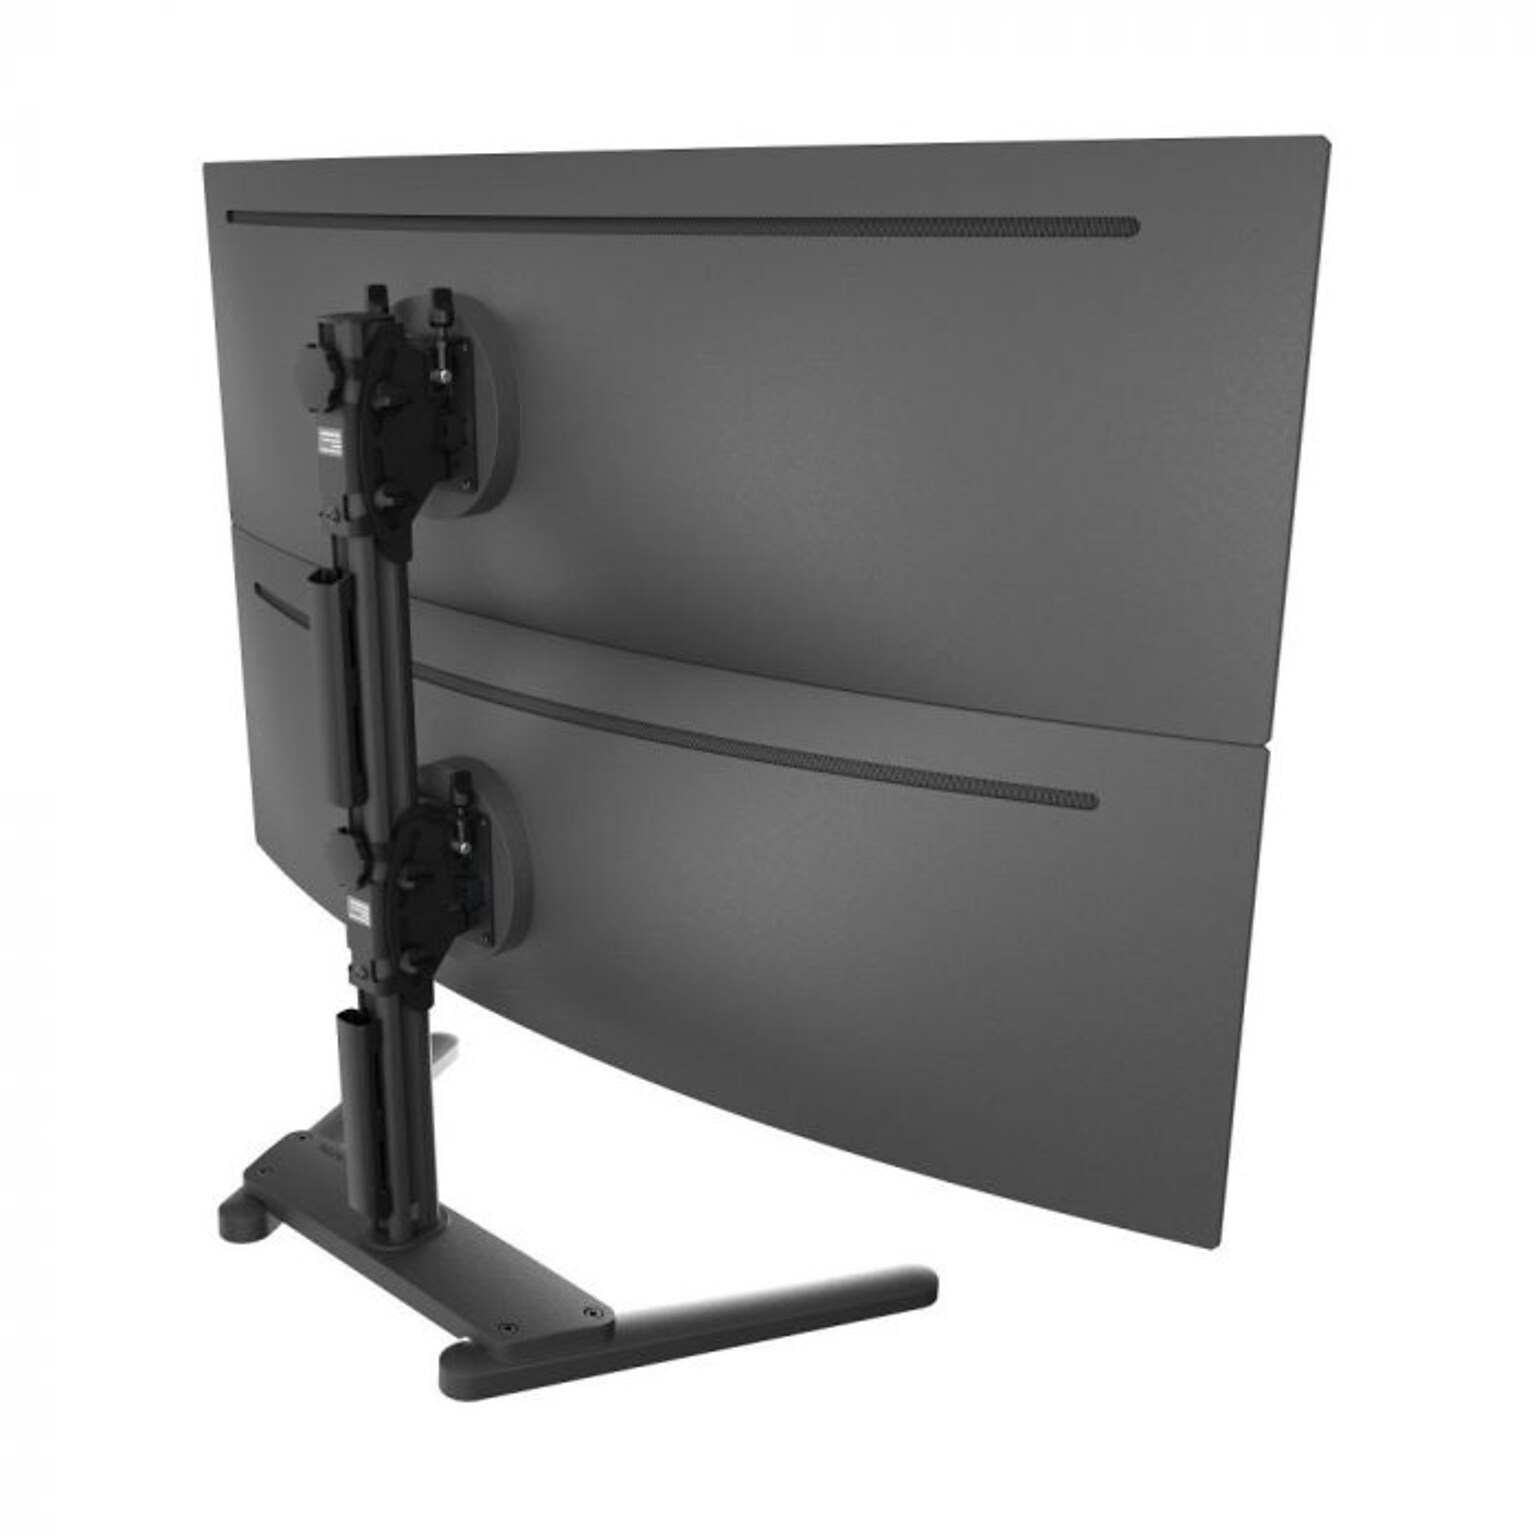 Atdec Adjustable Heavy Duty Dual Vertical Monitor Mount for Monitors Up to 55, Black (AWMS-2-BT75-FS-B)